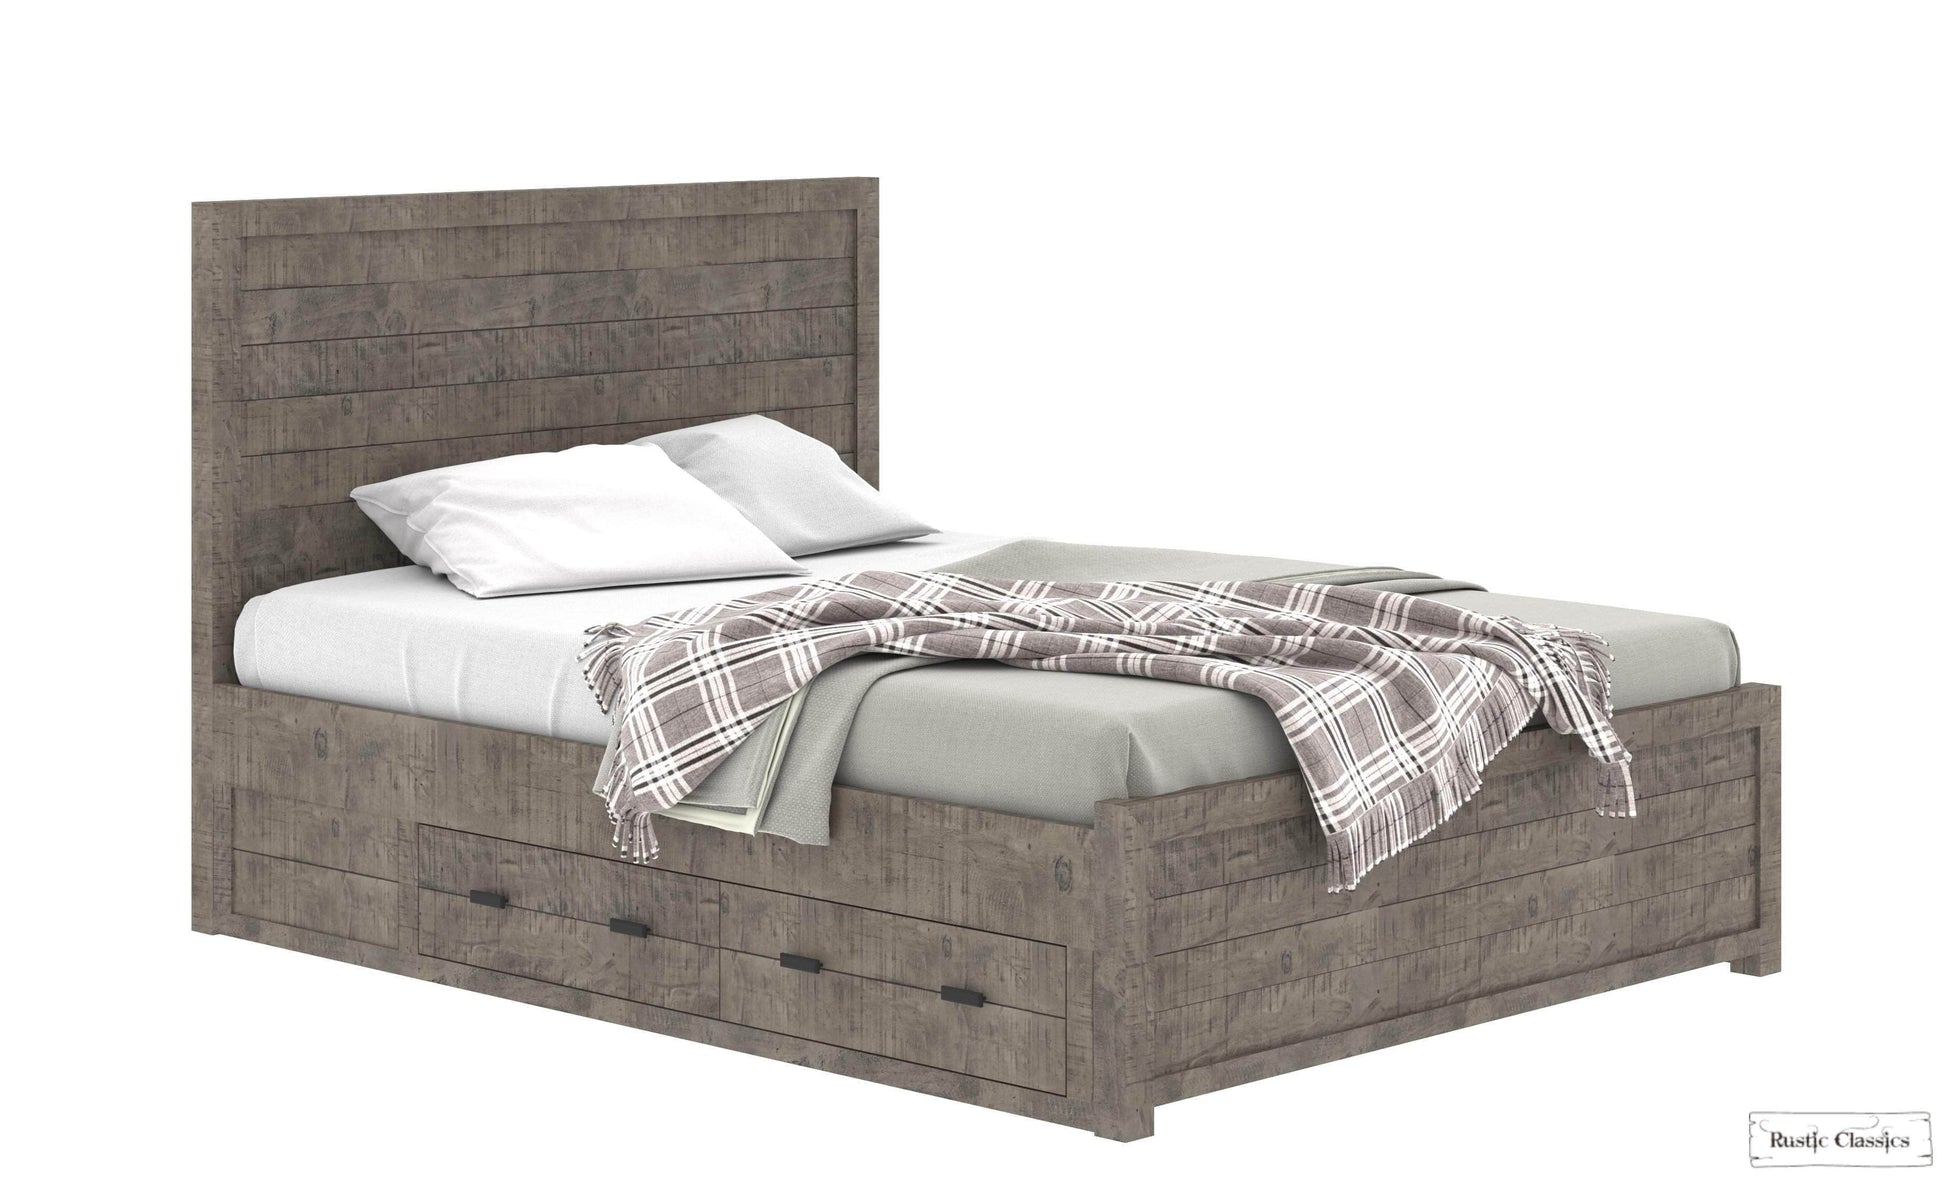 Rustic Classics Bedroom Set Whistler 4 Piece Reclaimed Wood Storage Platform Bedroom Furniture Set in Grey – Available in 2 Sizes